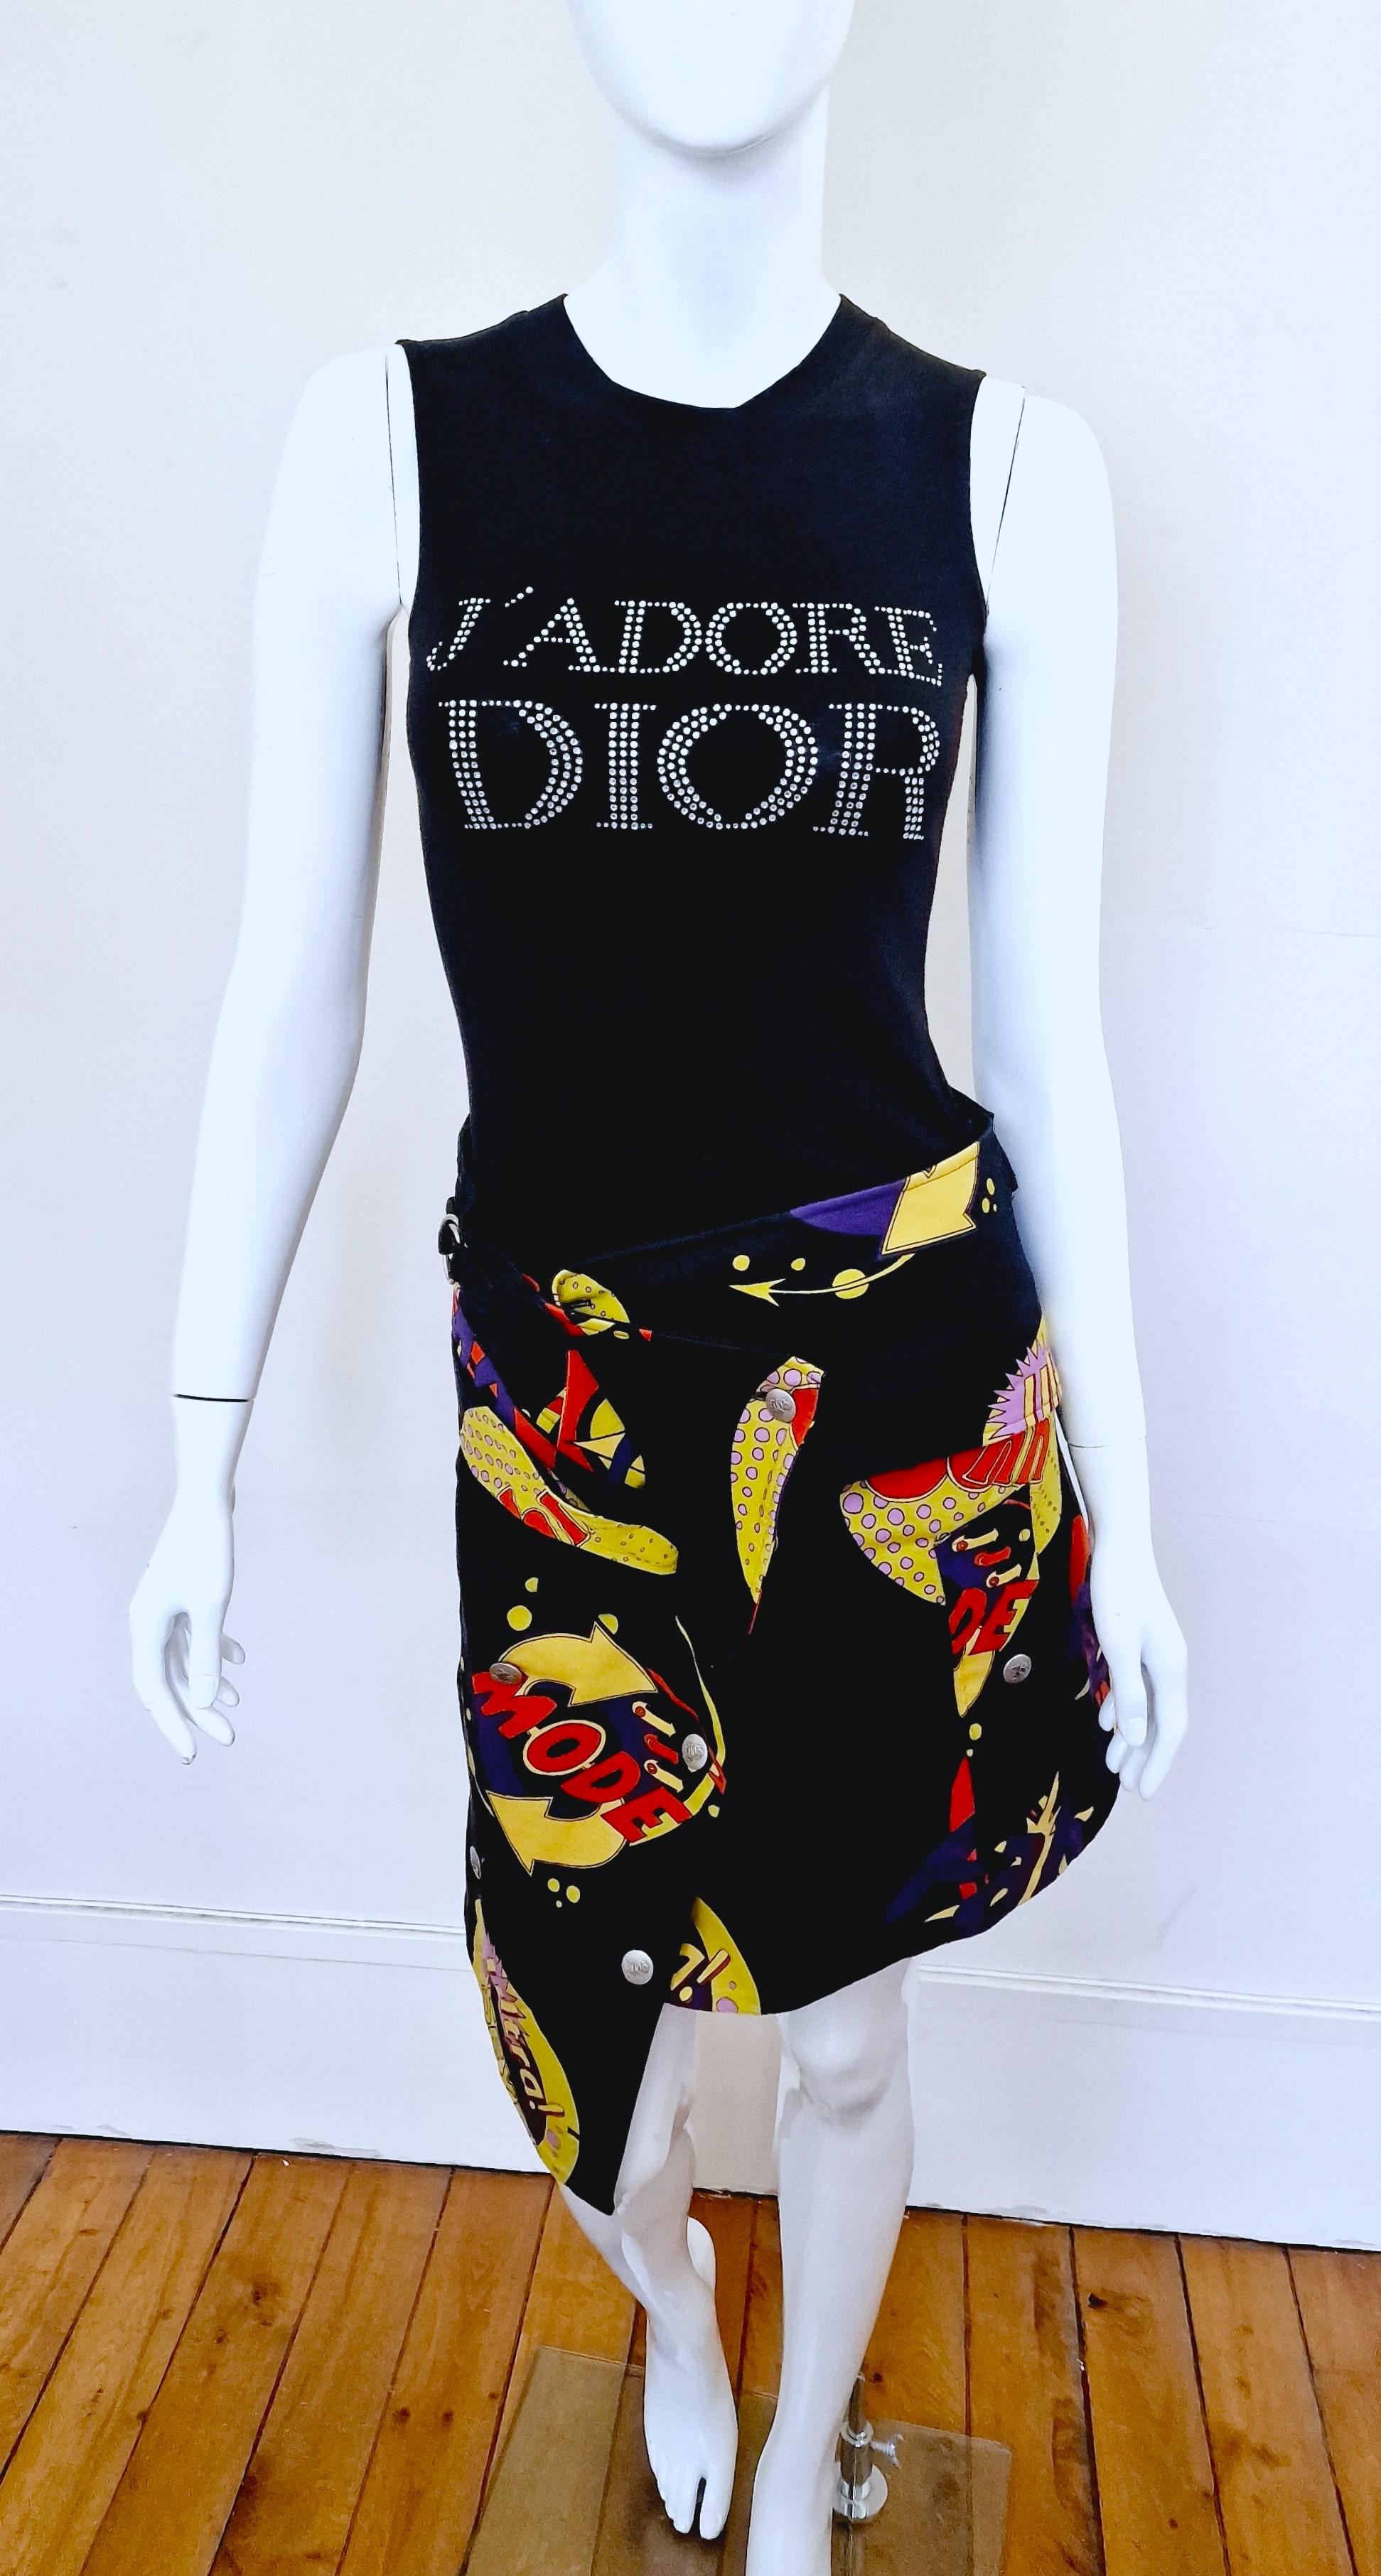 Asymmetric cartoon skirt by John Galliano!
With pockets, metal hooks.
JG metal buttons.
Wrap closure.
With belt. 

VERY GOOD condition! Light issue at a small part, please check the last photo!

SIZE
Medium.
No size label.
Length: 44-57 cm /